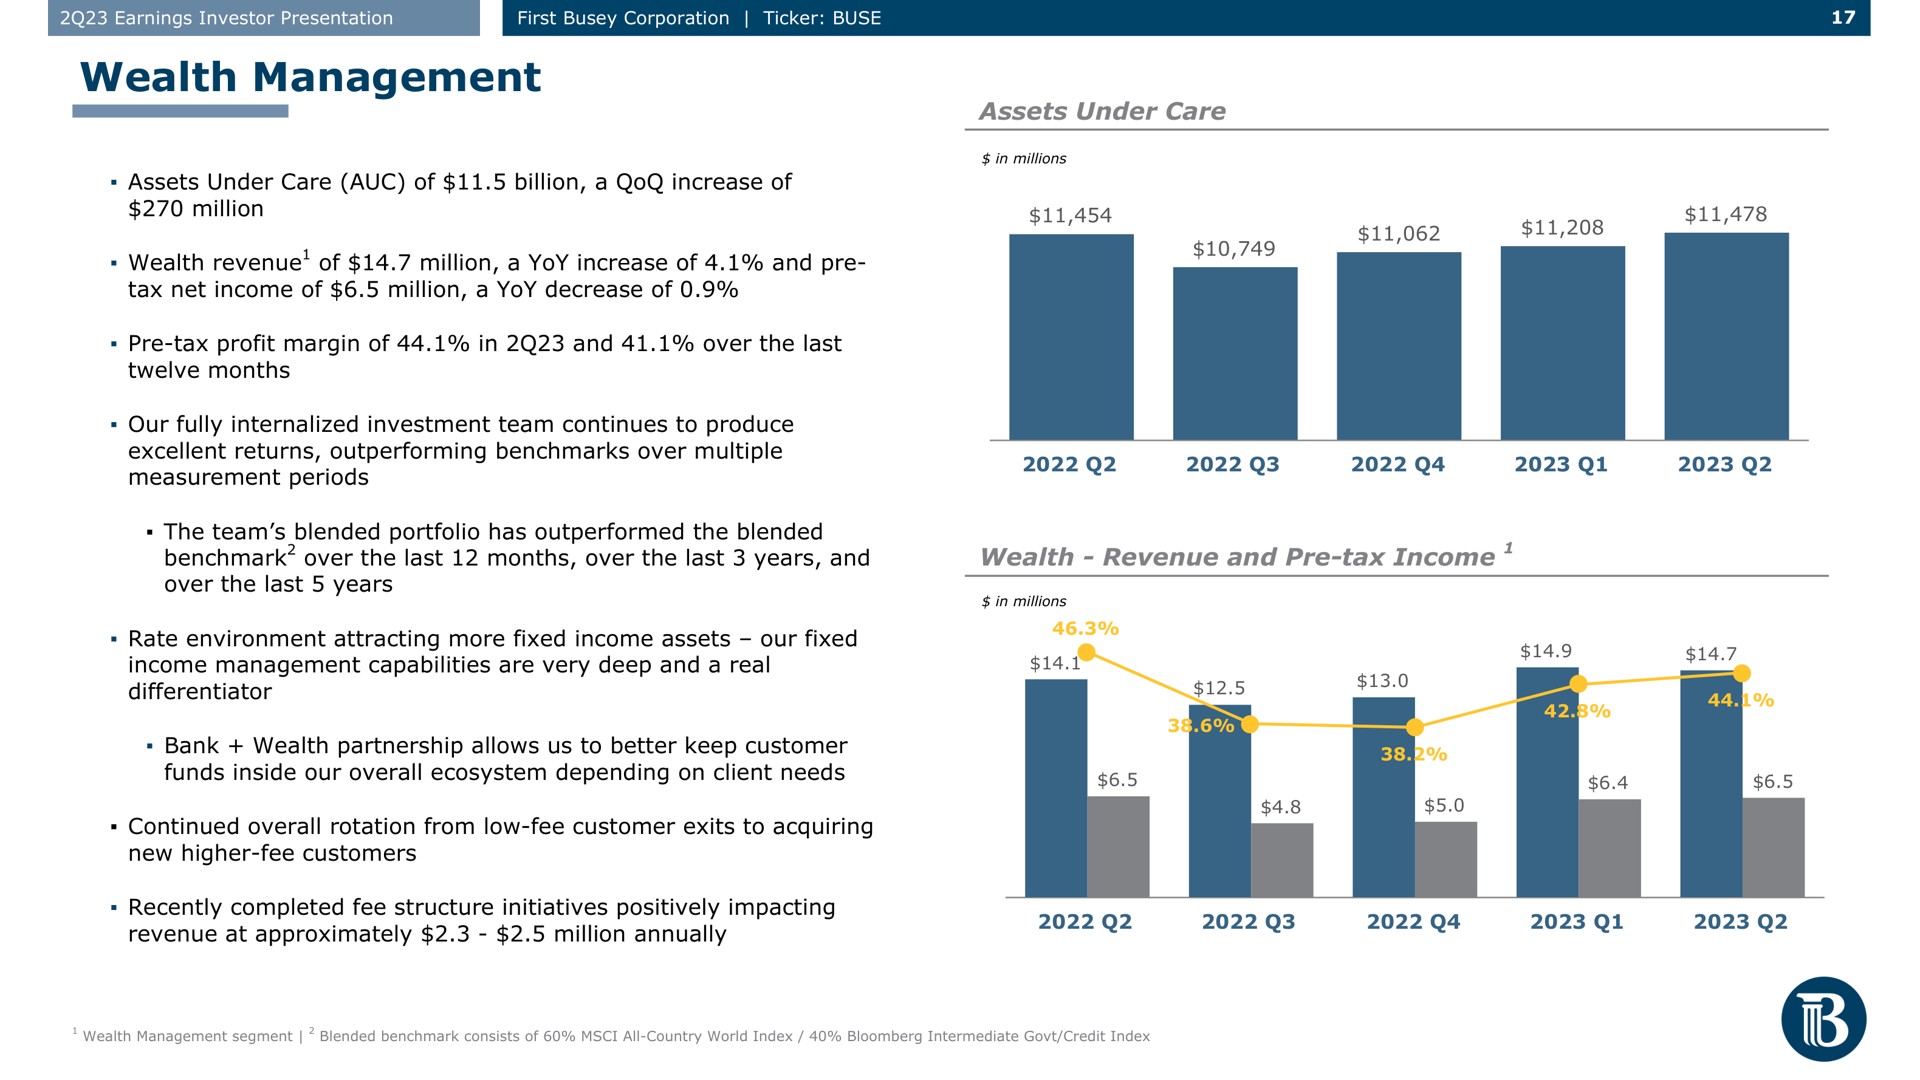 wealth management assets under care wealth revenue and tax income | First Busey